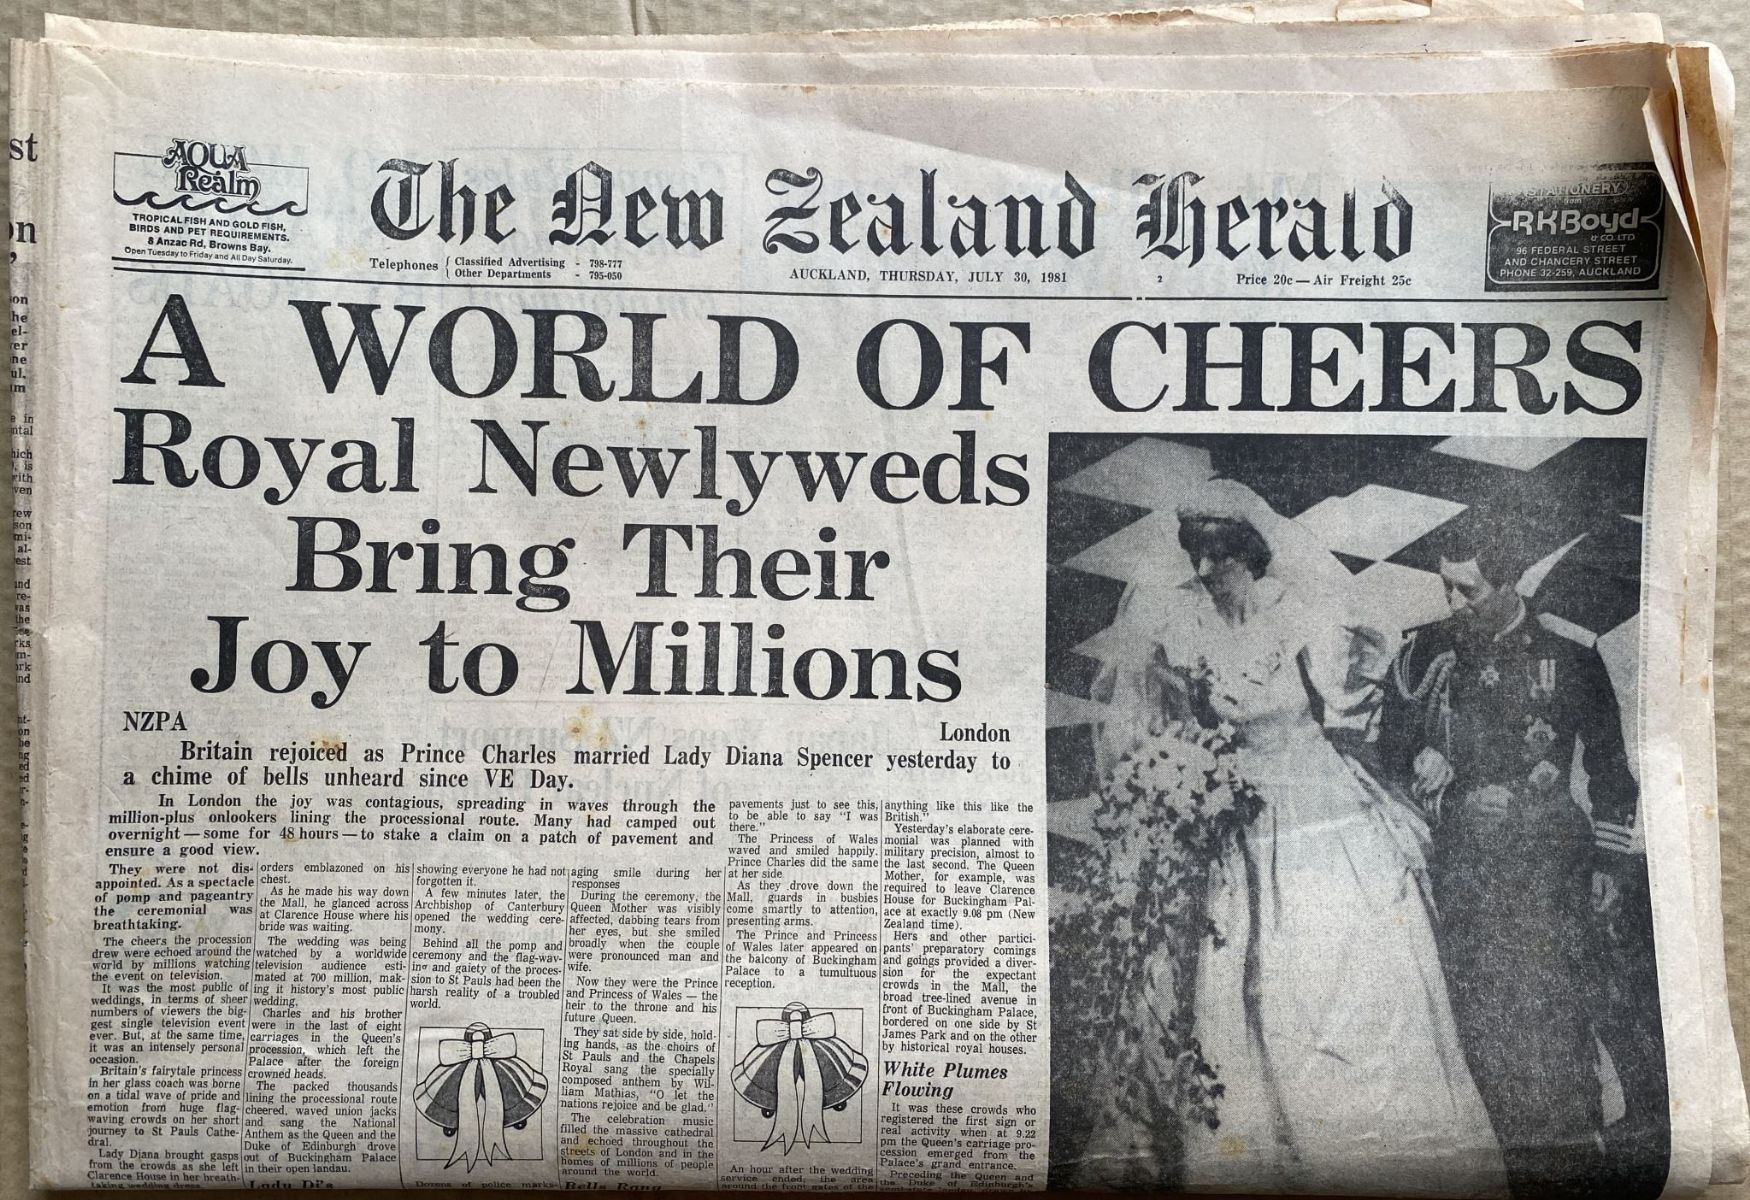 OLD NEWSPAPER: The New Zealand Herald, 30 June 1981 - Royal wedding coverage